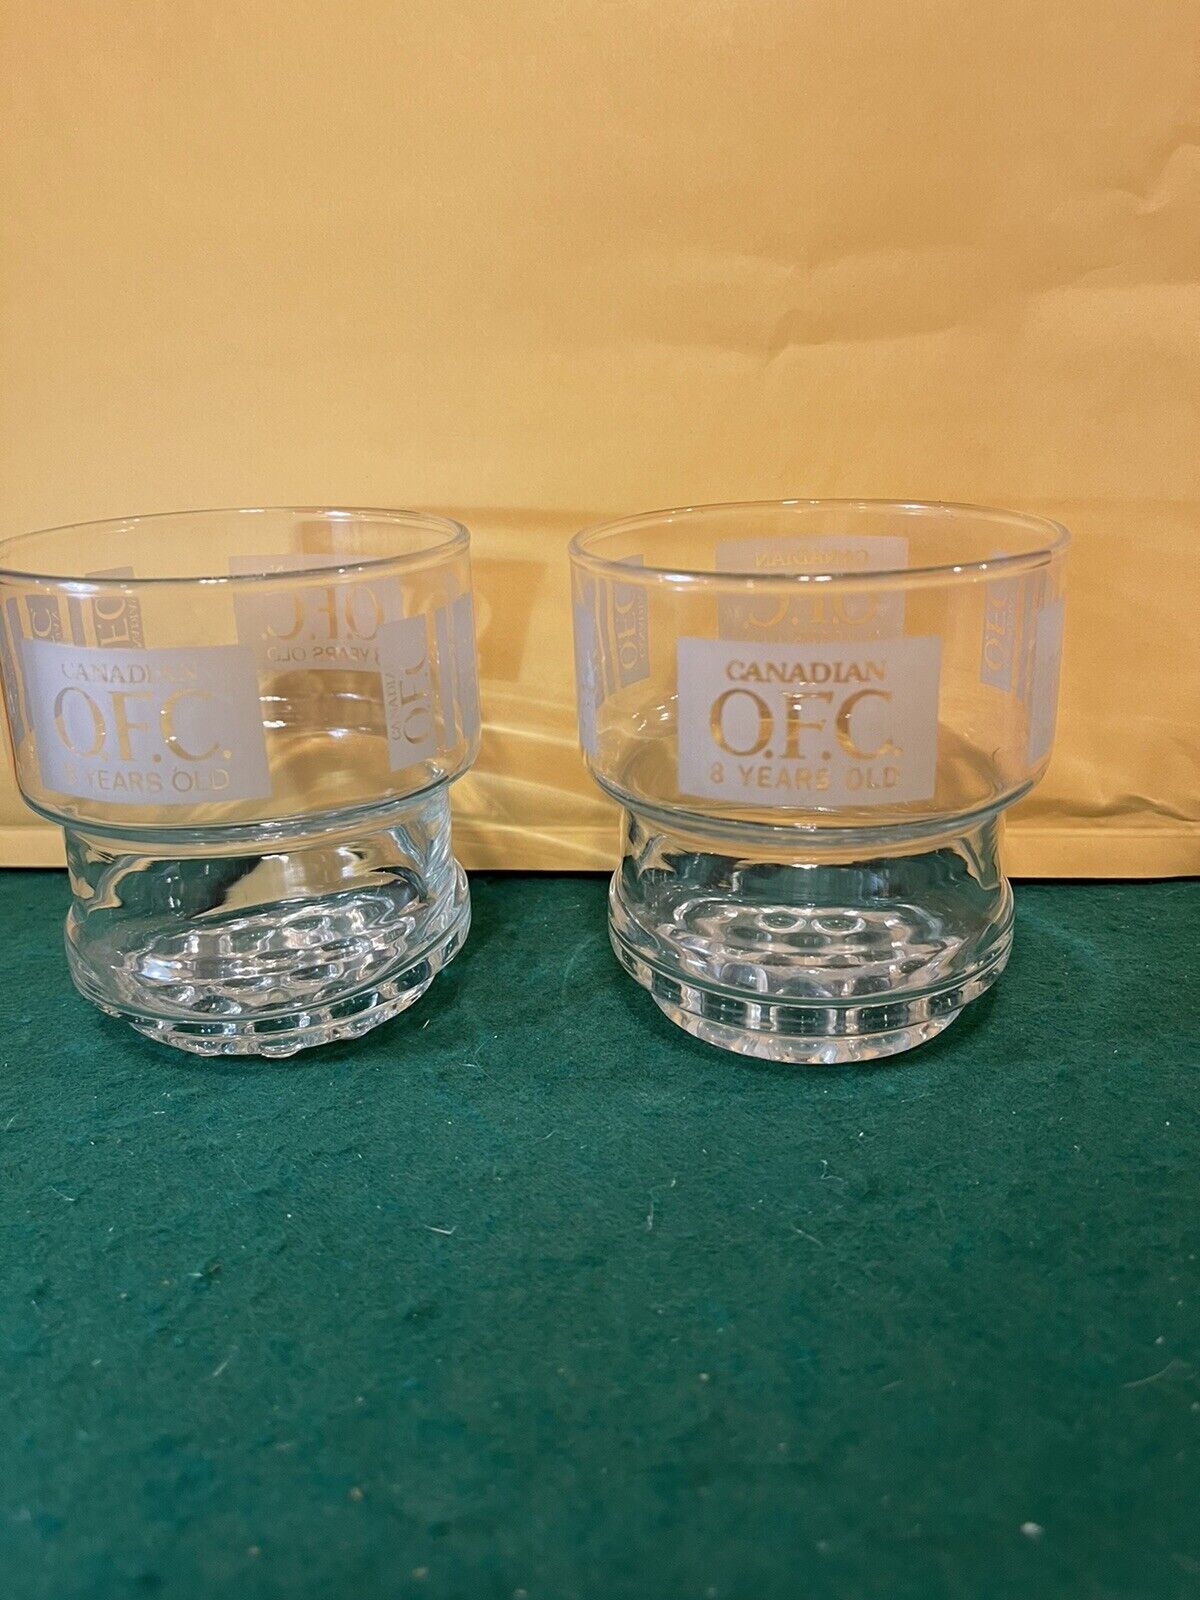 2 Vintage Imported OFC Canadian Whisky Rocks Glasses 8 Years Old